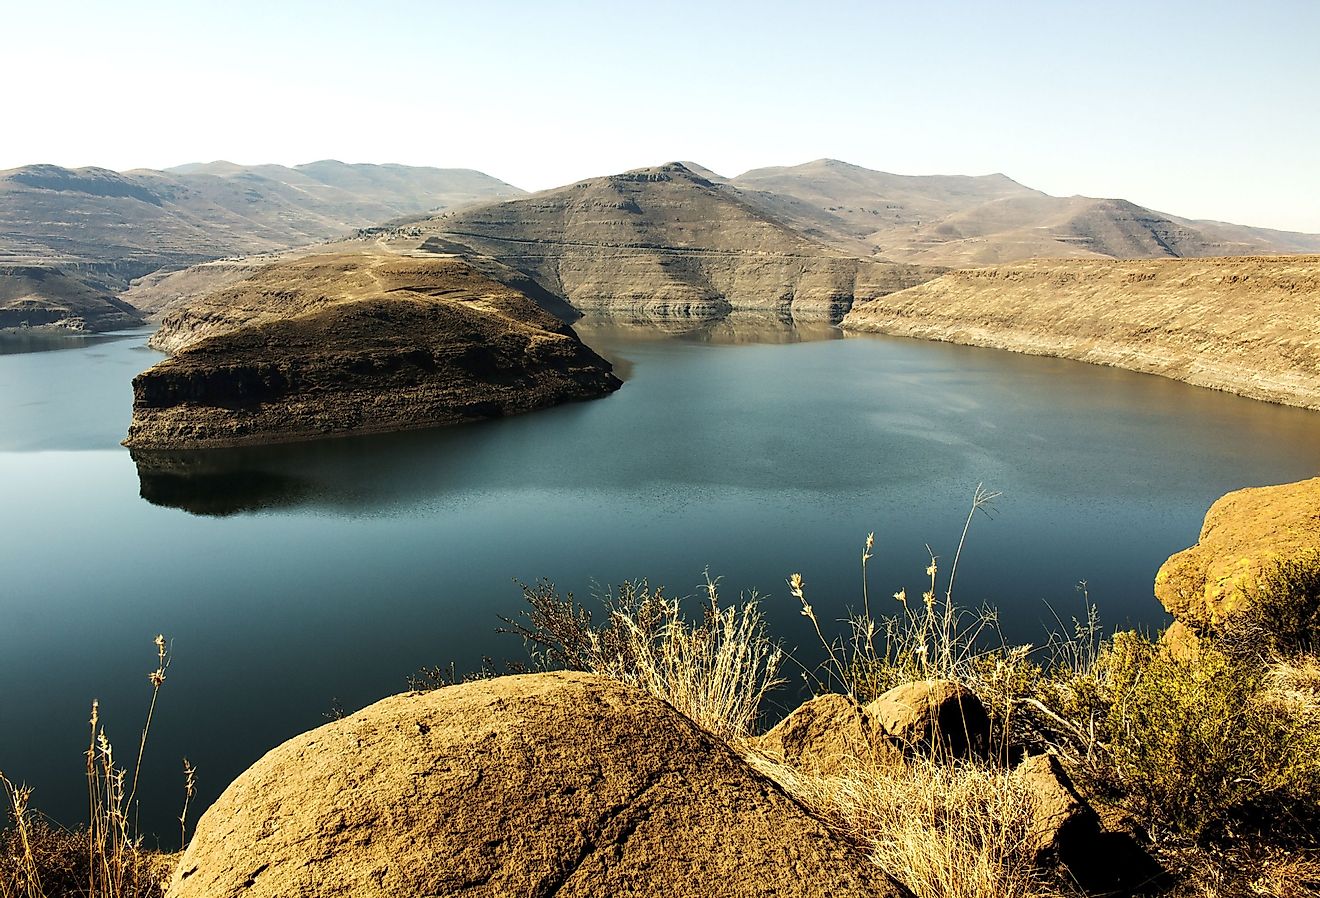 Panoramic view in Lesotho, southern Africa. Beautiful landscape in Drakensberg. Image credit Dendenal via Shutterstock. 